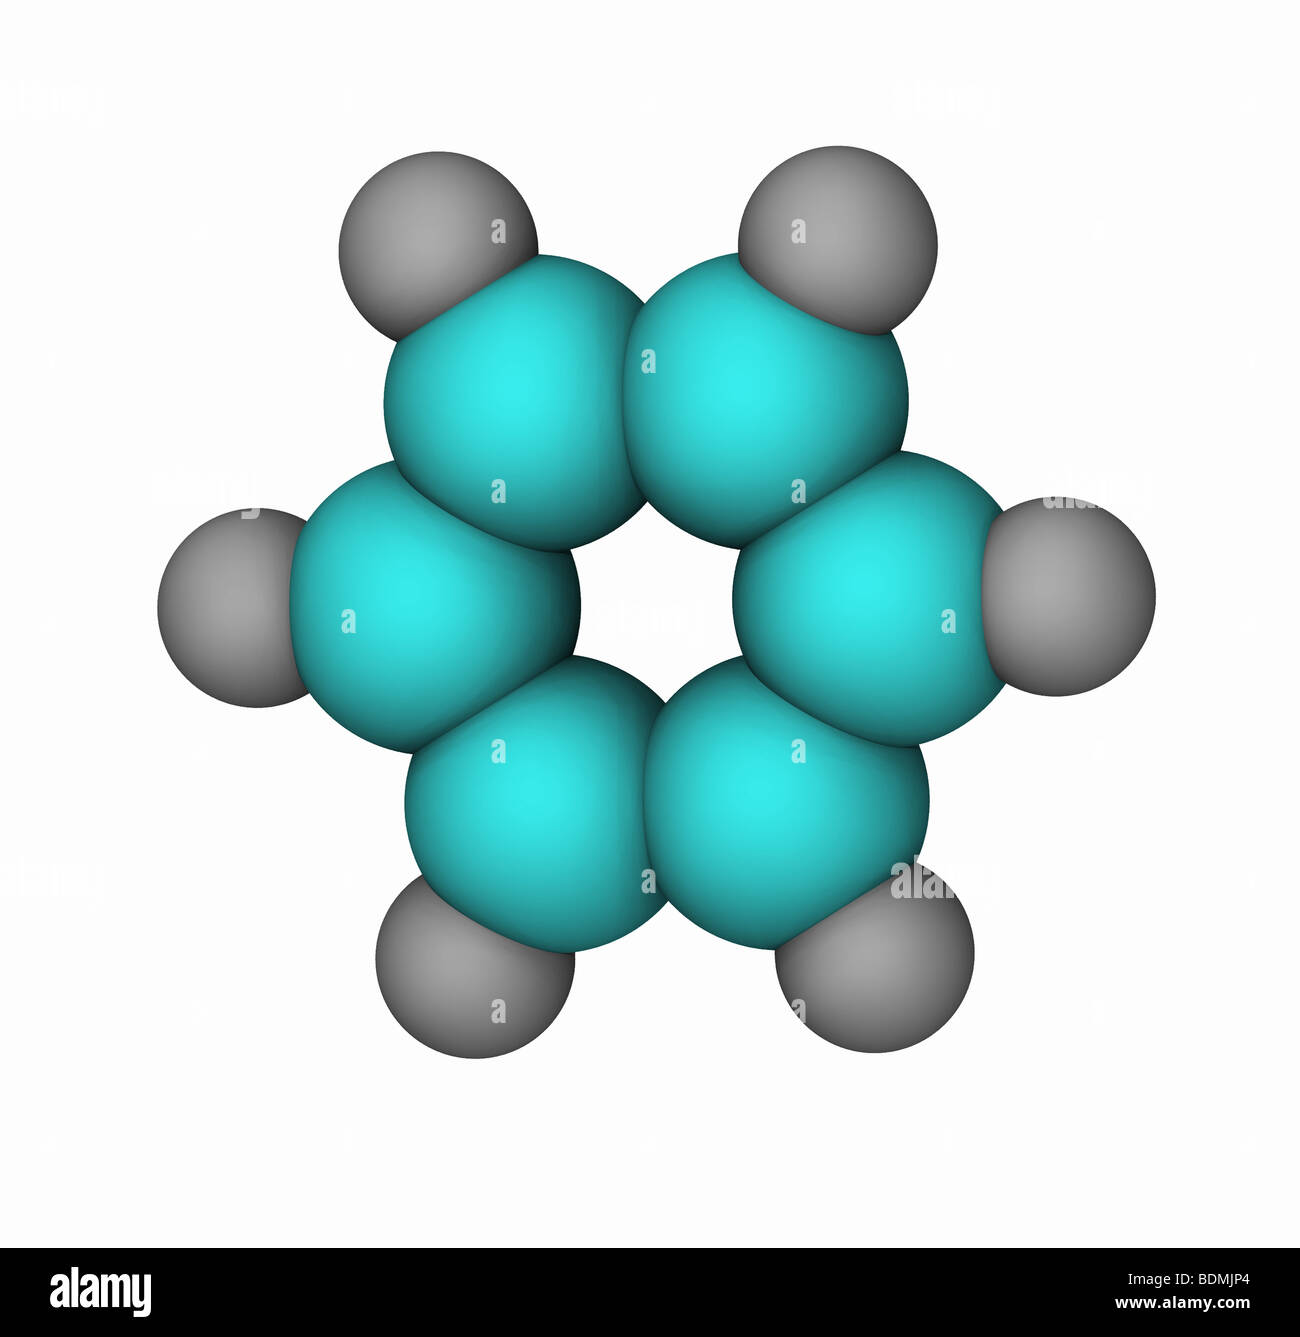 three-dimensional space-filling computer-generated model of the benzene ring Stock Photo